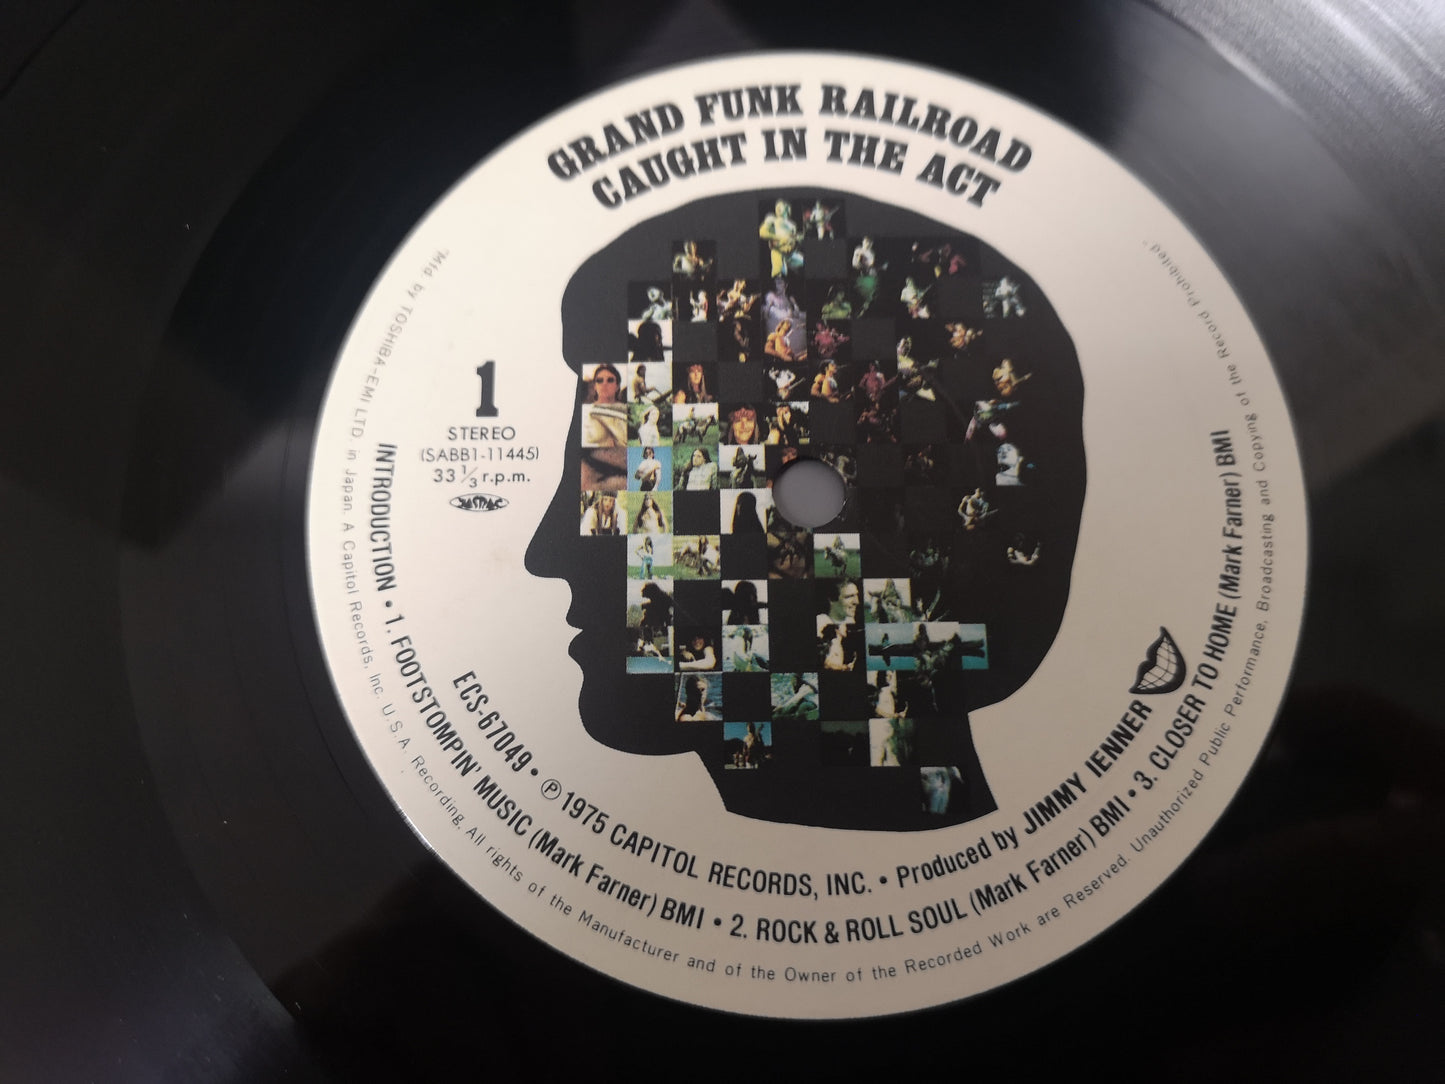 Grand Funk Railroad "Caught in the Act" Orig Japan 2 Lps VG++/EX/EX